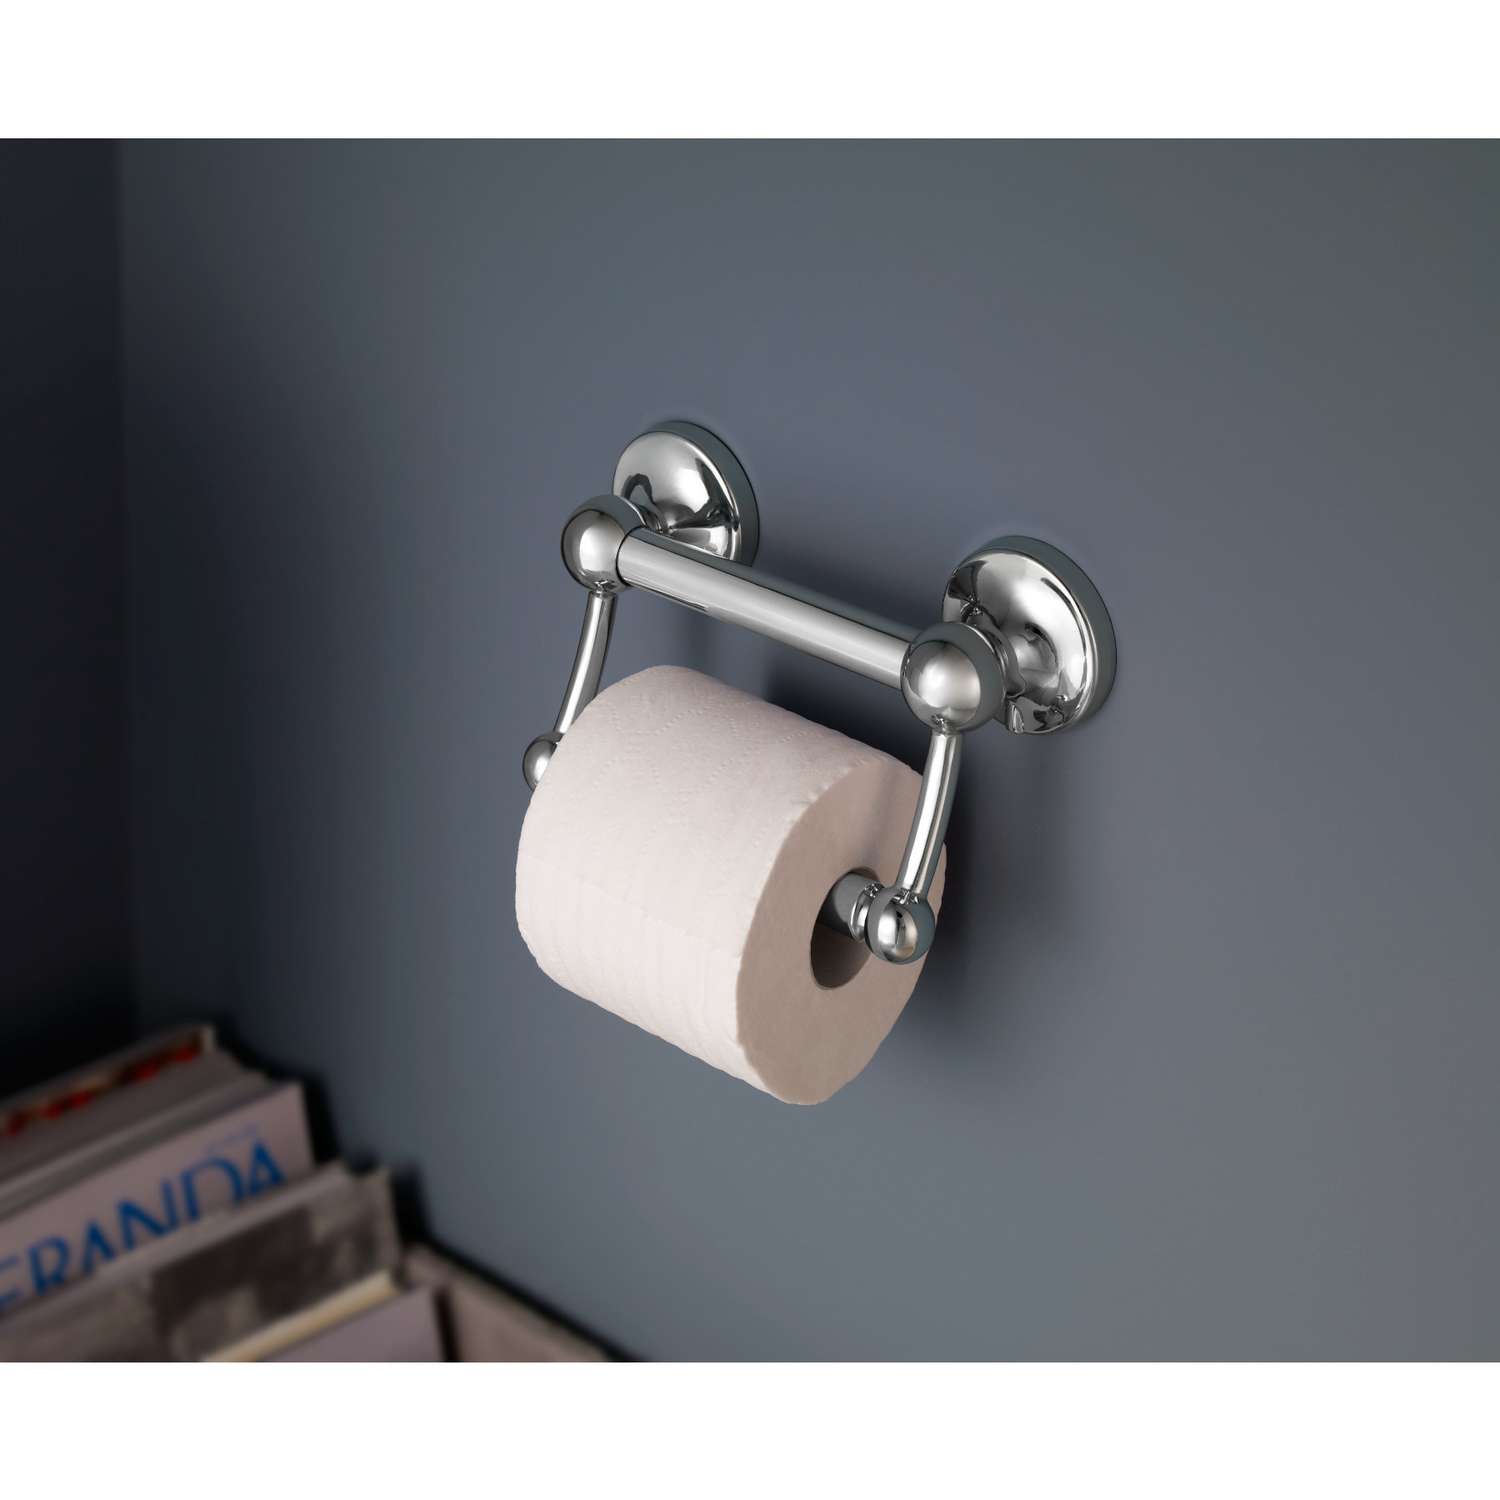 ORLESS Adhesive Paper Towel Holder Under Cabinet & Wall Mount, No Drilling  Suitable for Kitchen Bathroom - Silver